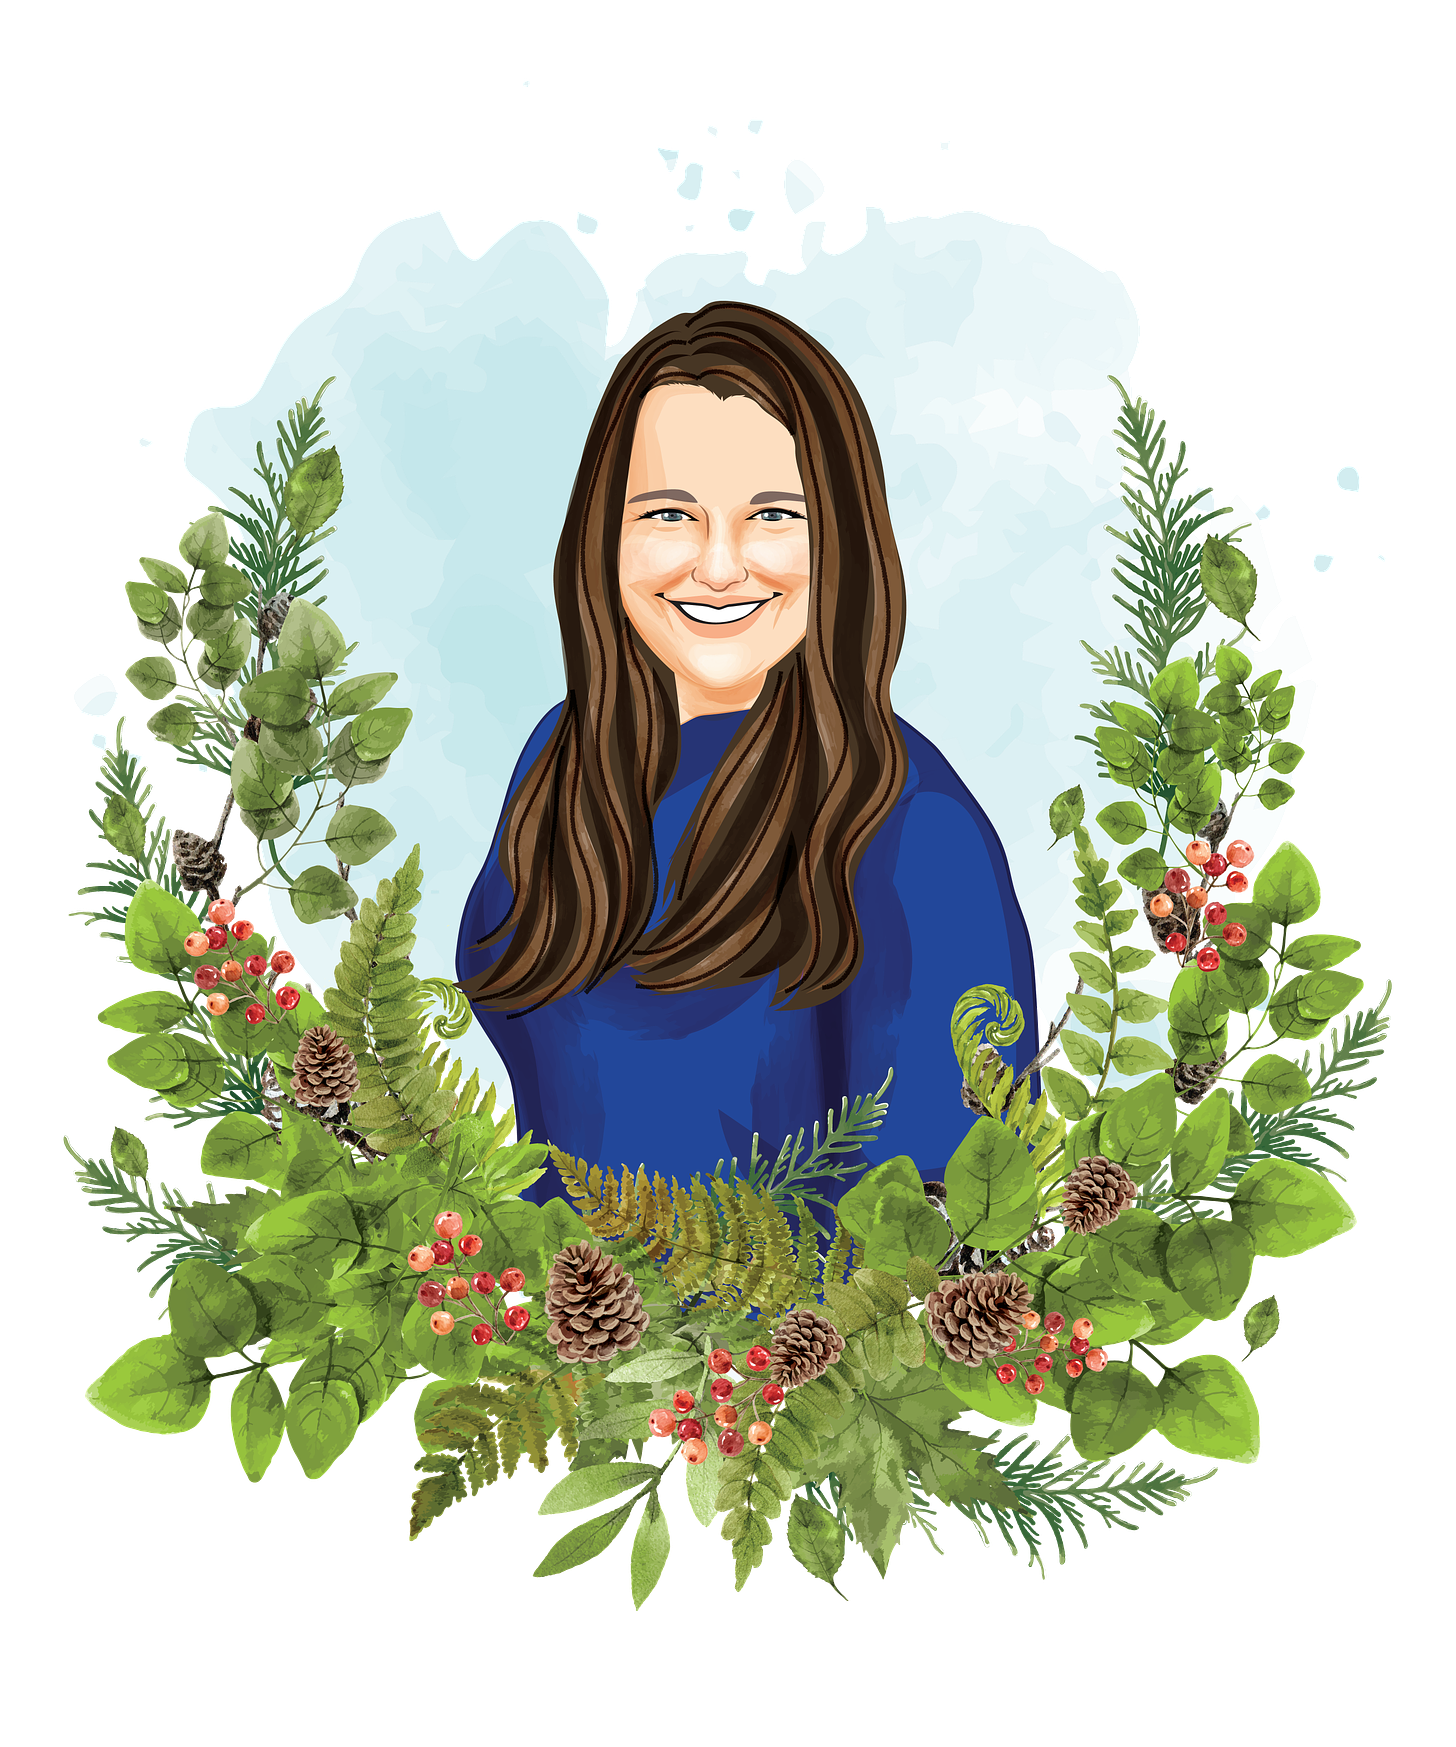 Illustration of homeschooling expert with wreath of Colorado vegetation